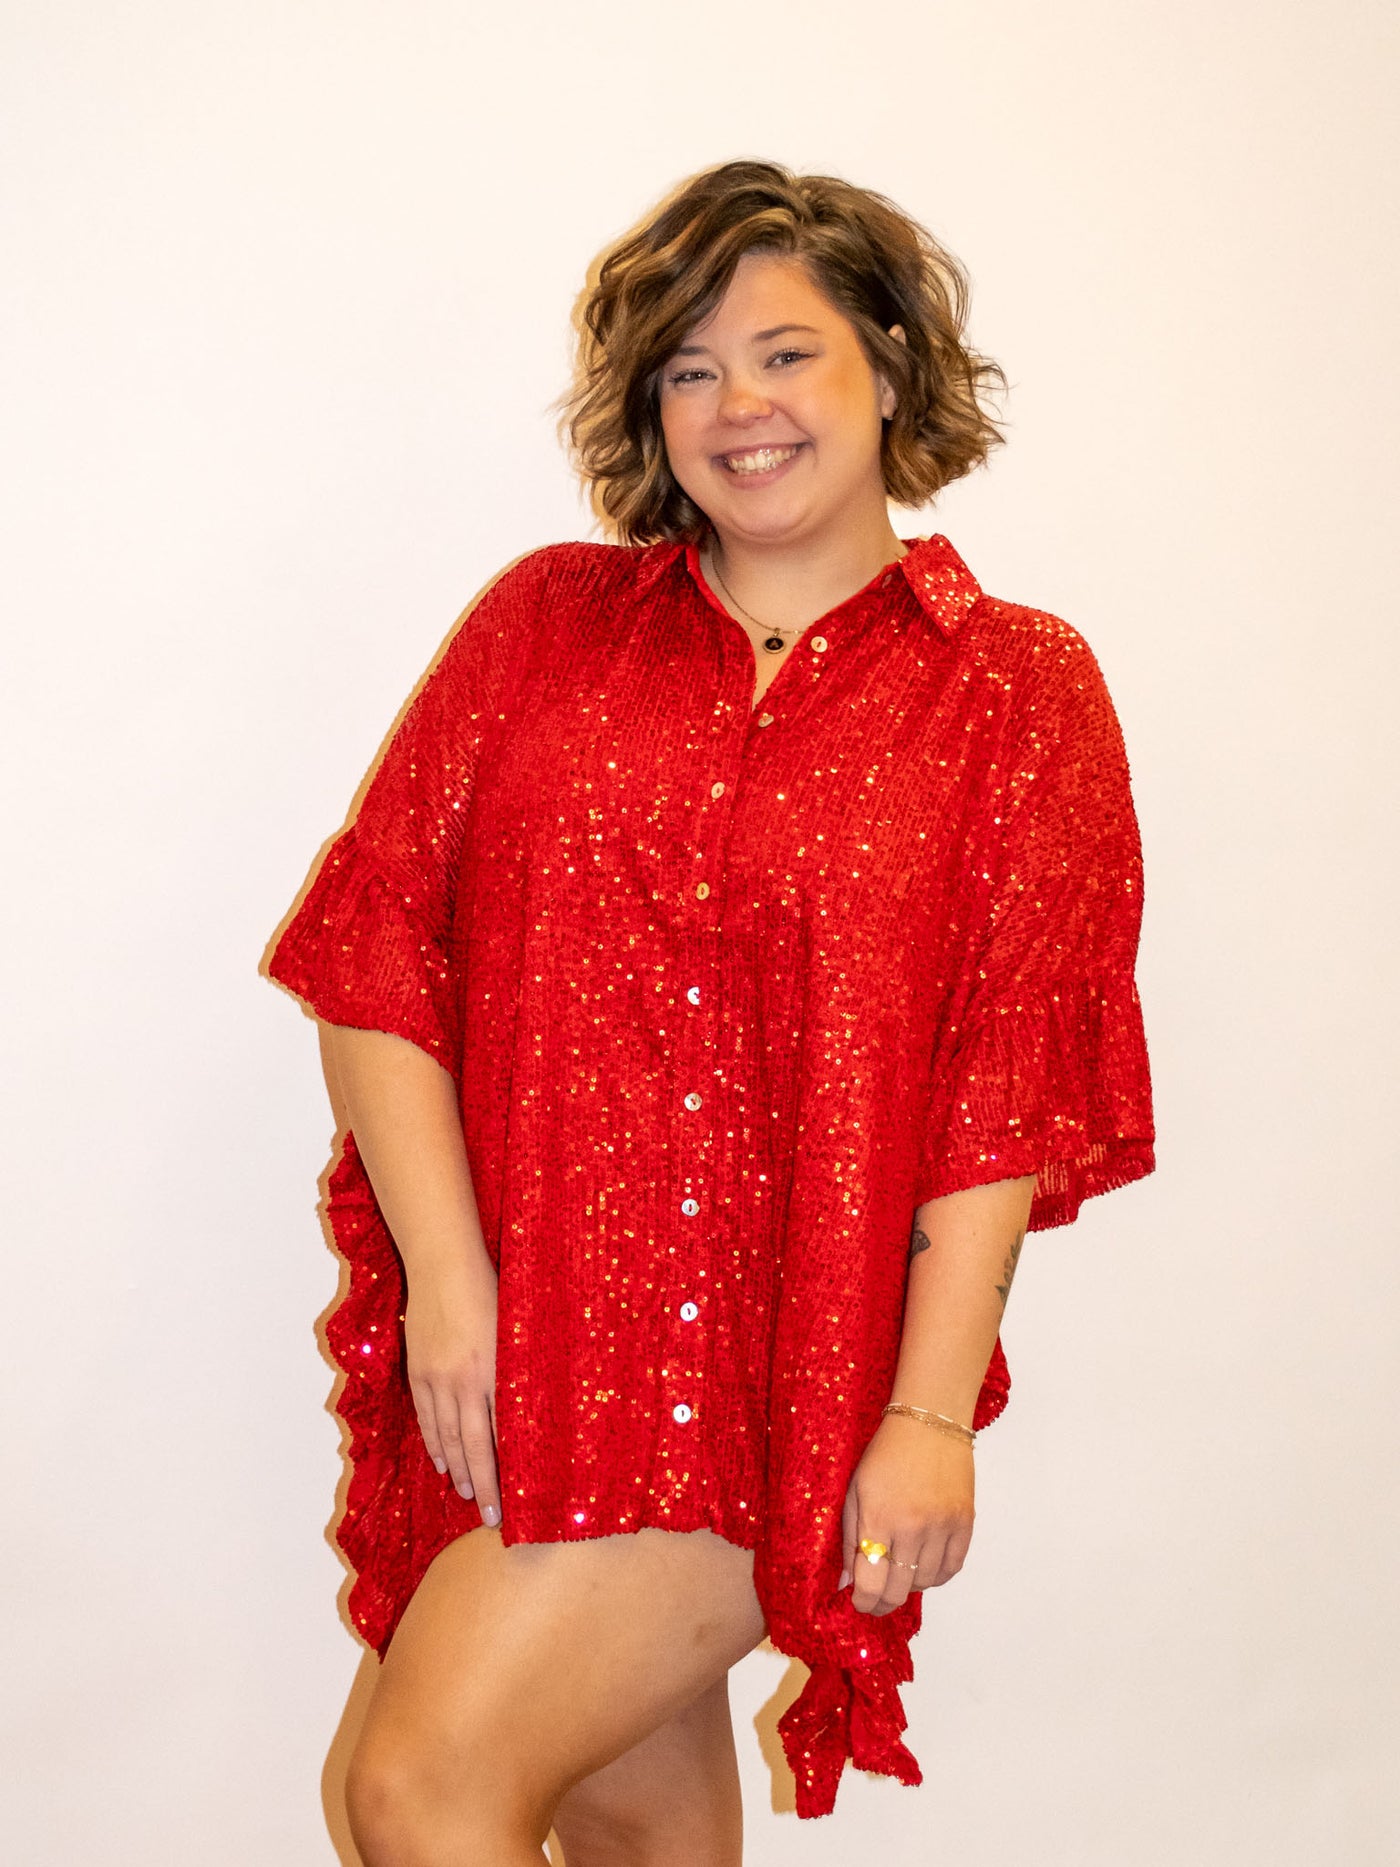 A model wearing a red sequin top with ruffle details and a button down closure.